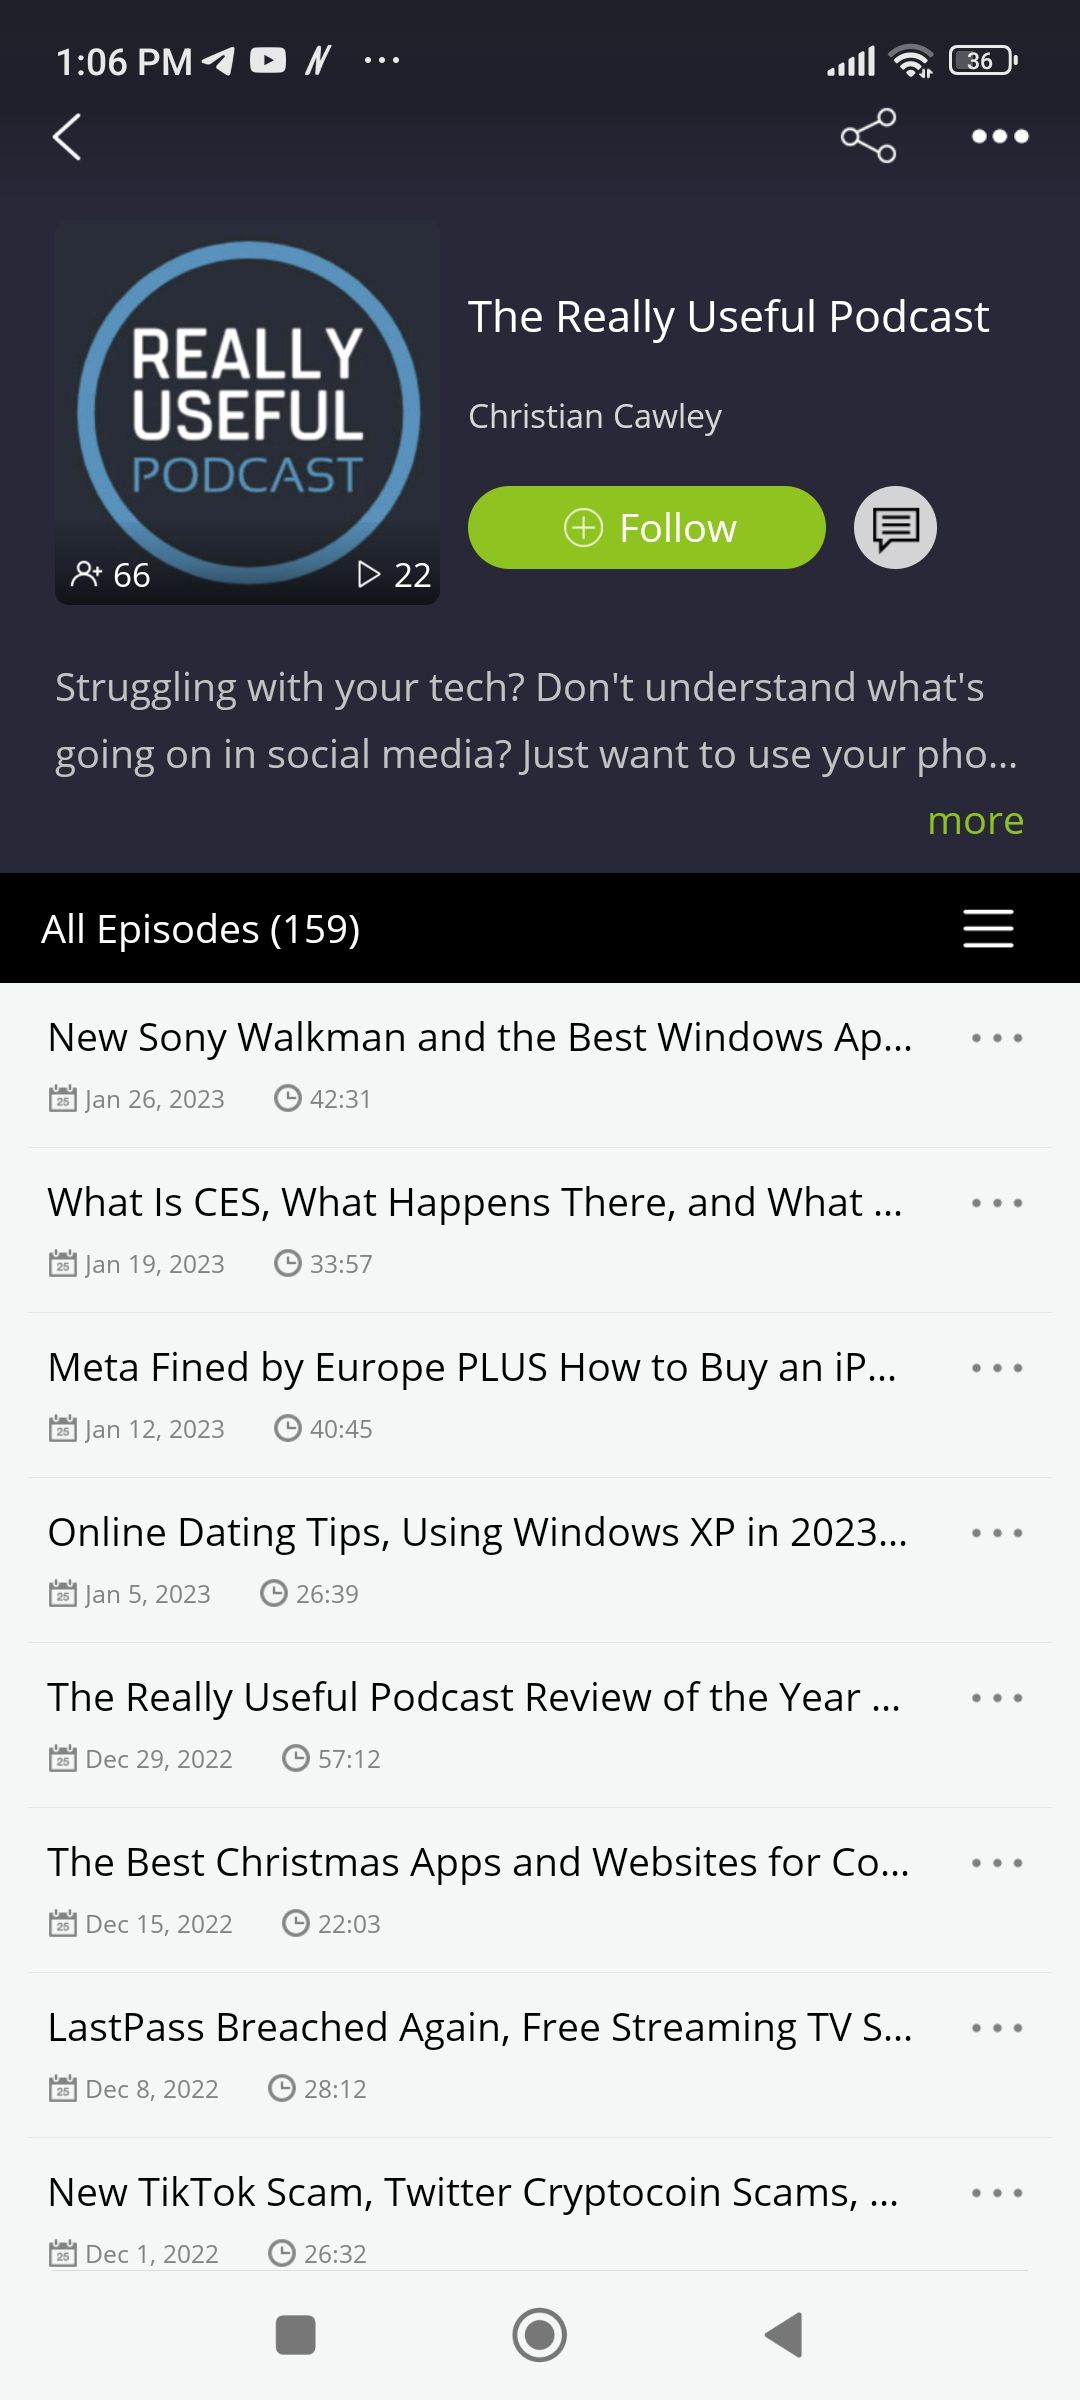 Podbean podcast pverview and episodes